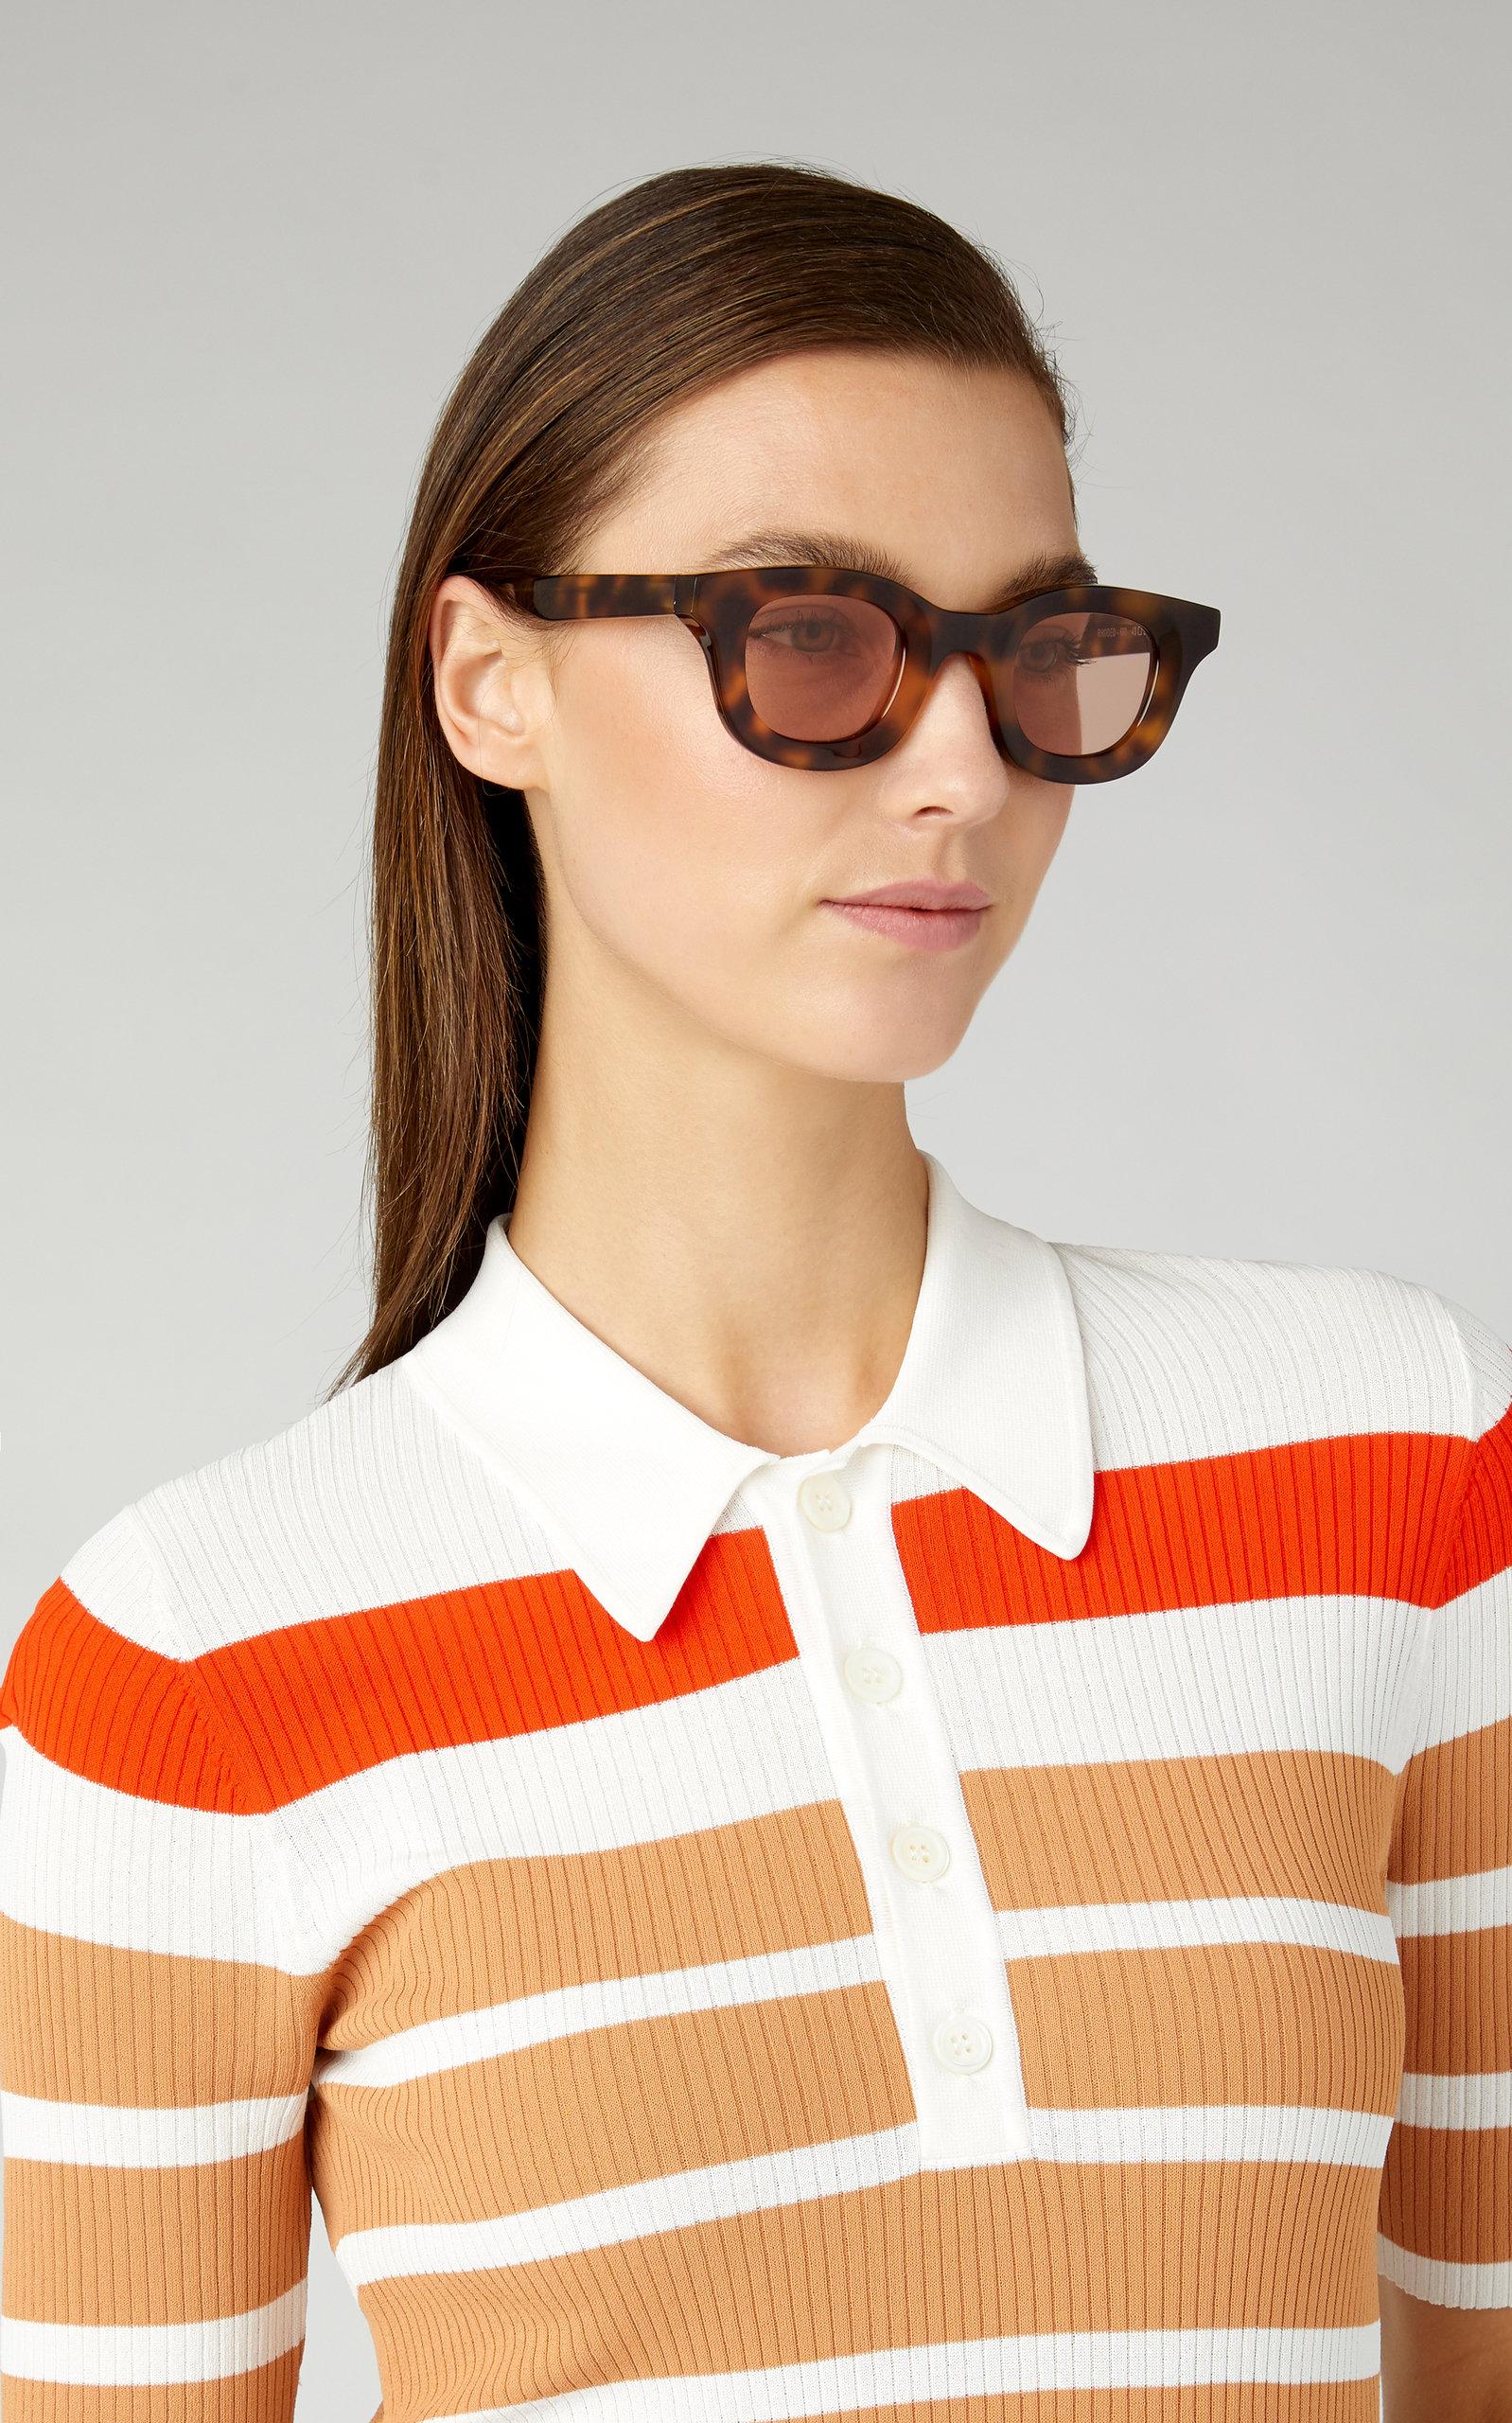 Rhude Thierry Lasry Rhodeo Sunglasses 